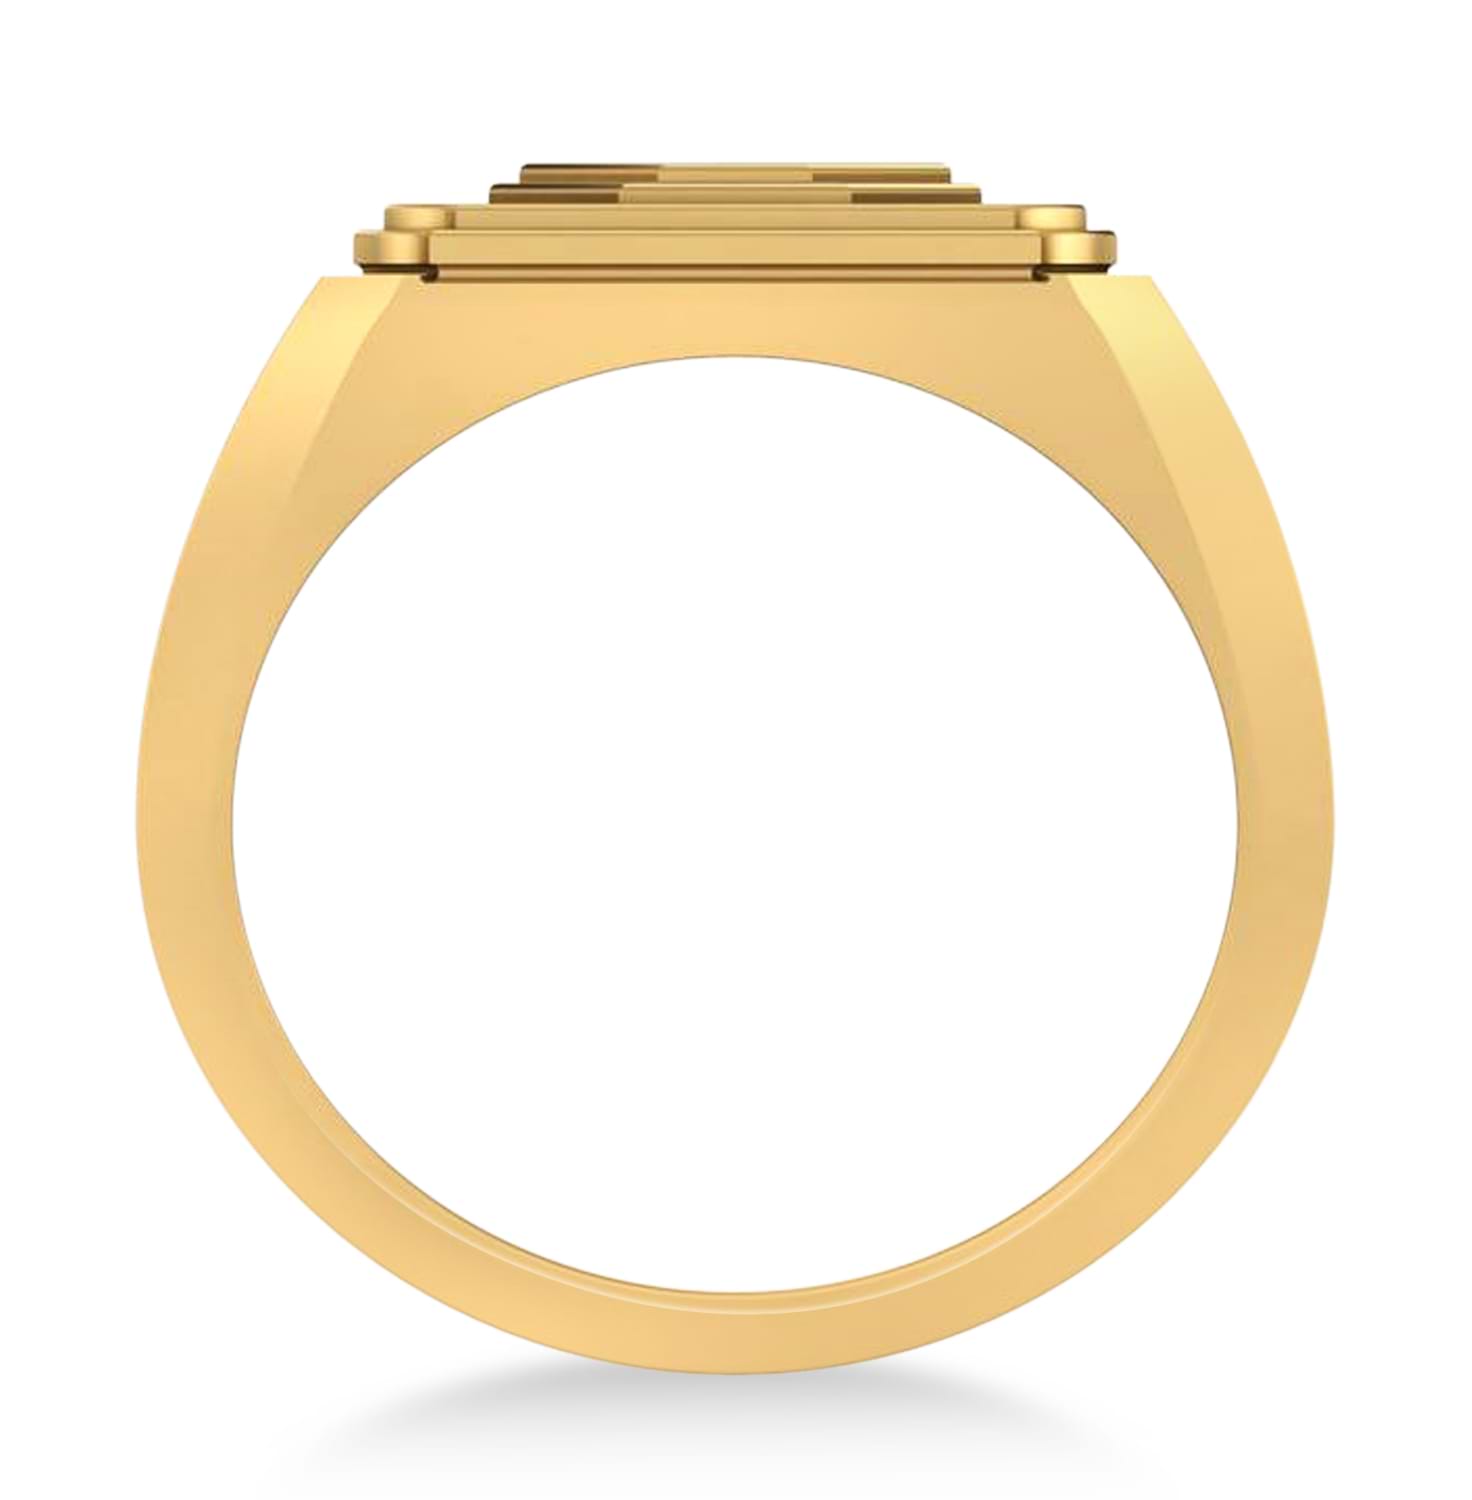 Mens Novelty Cross Ring in 14k Yellow Gold